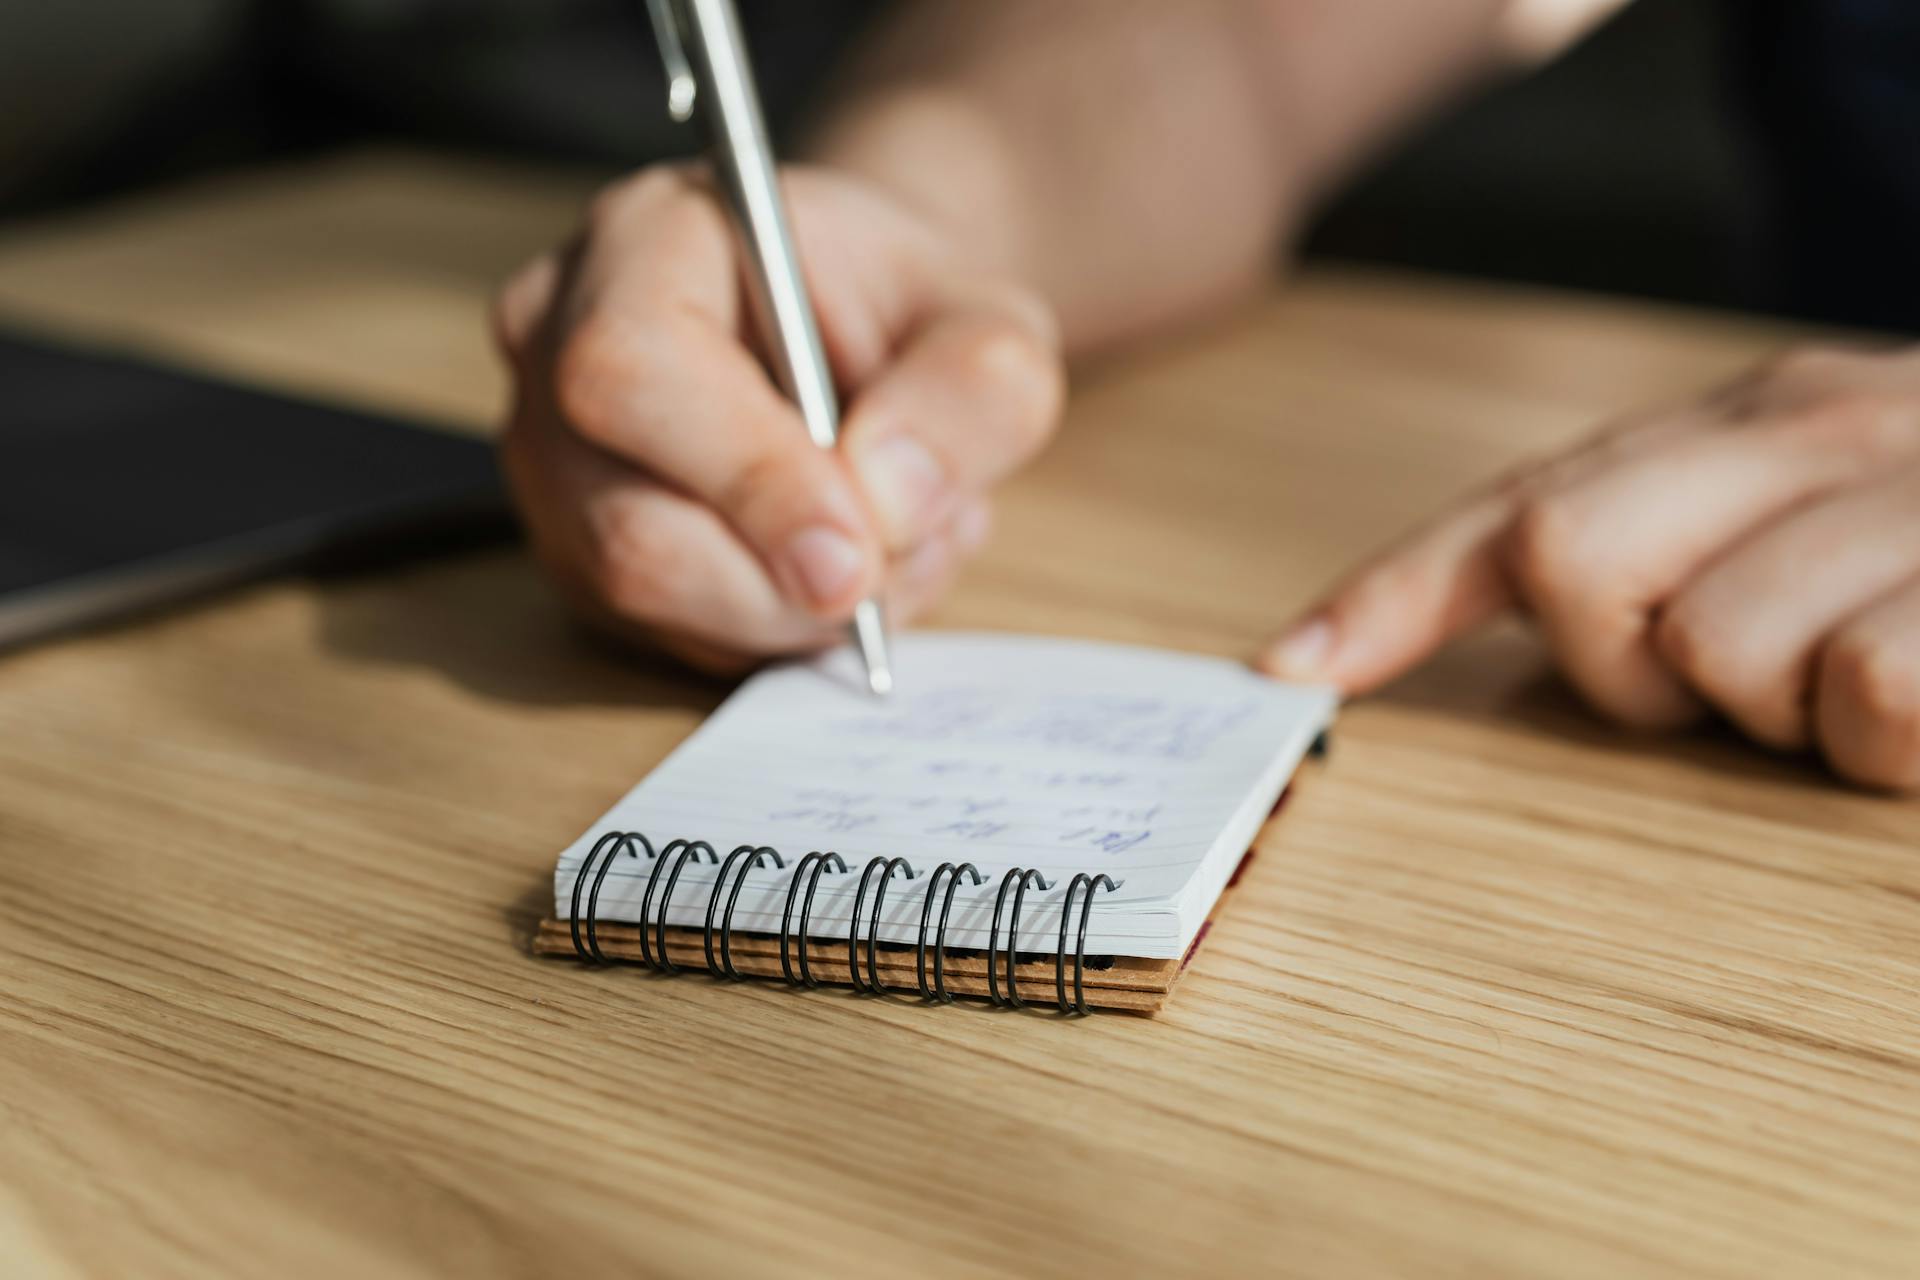 Person writing a note | Source: Pexels